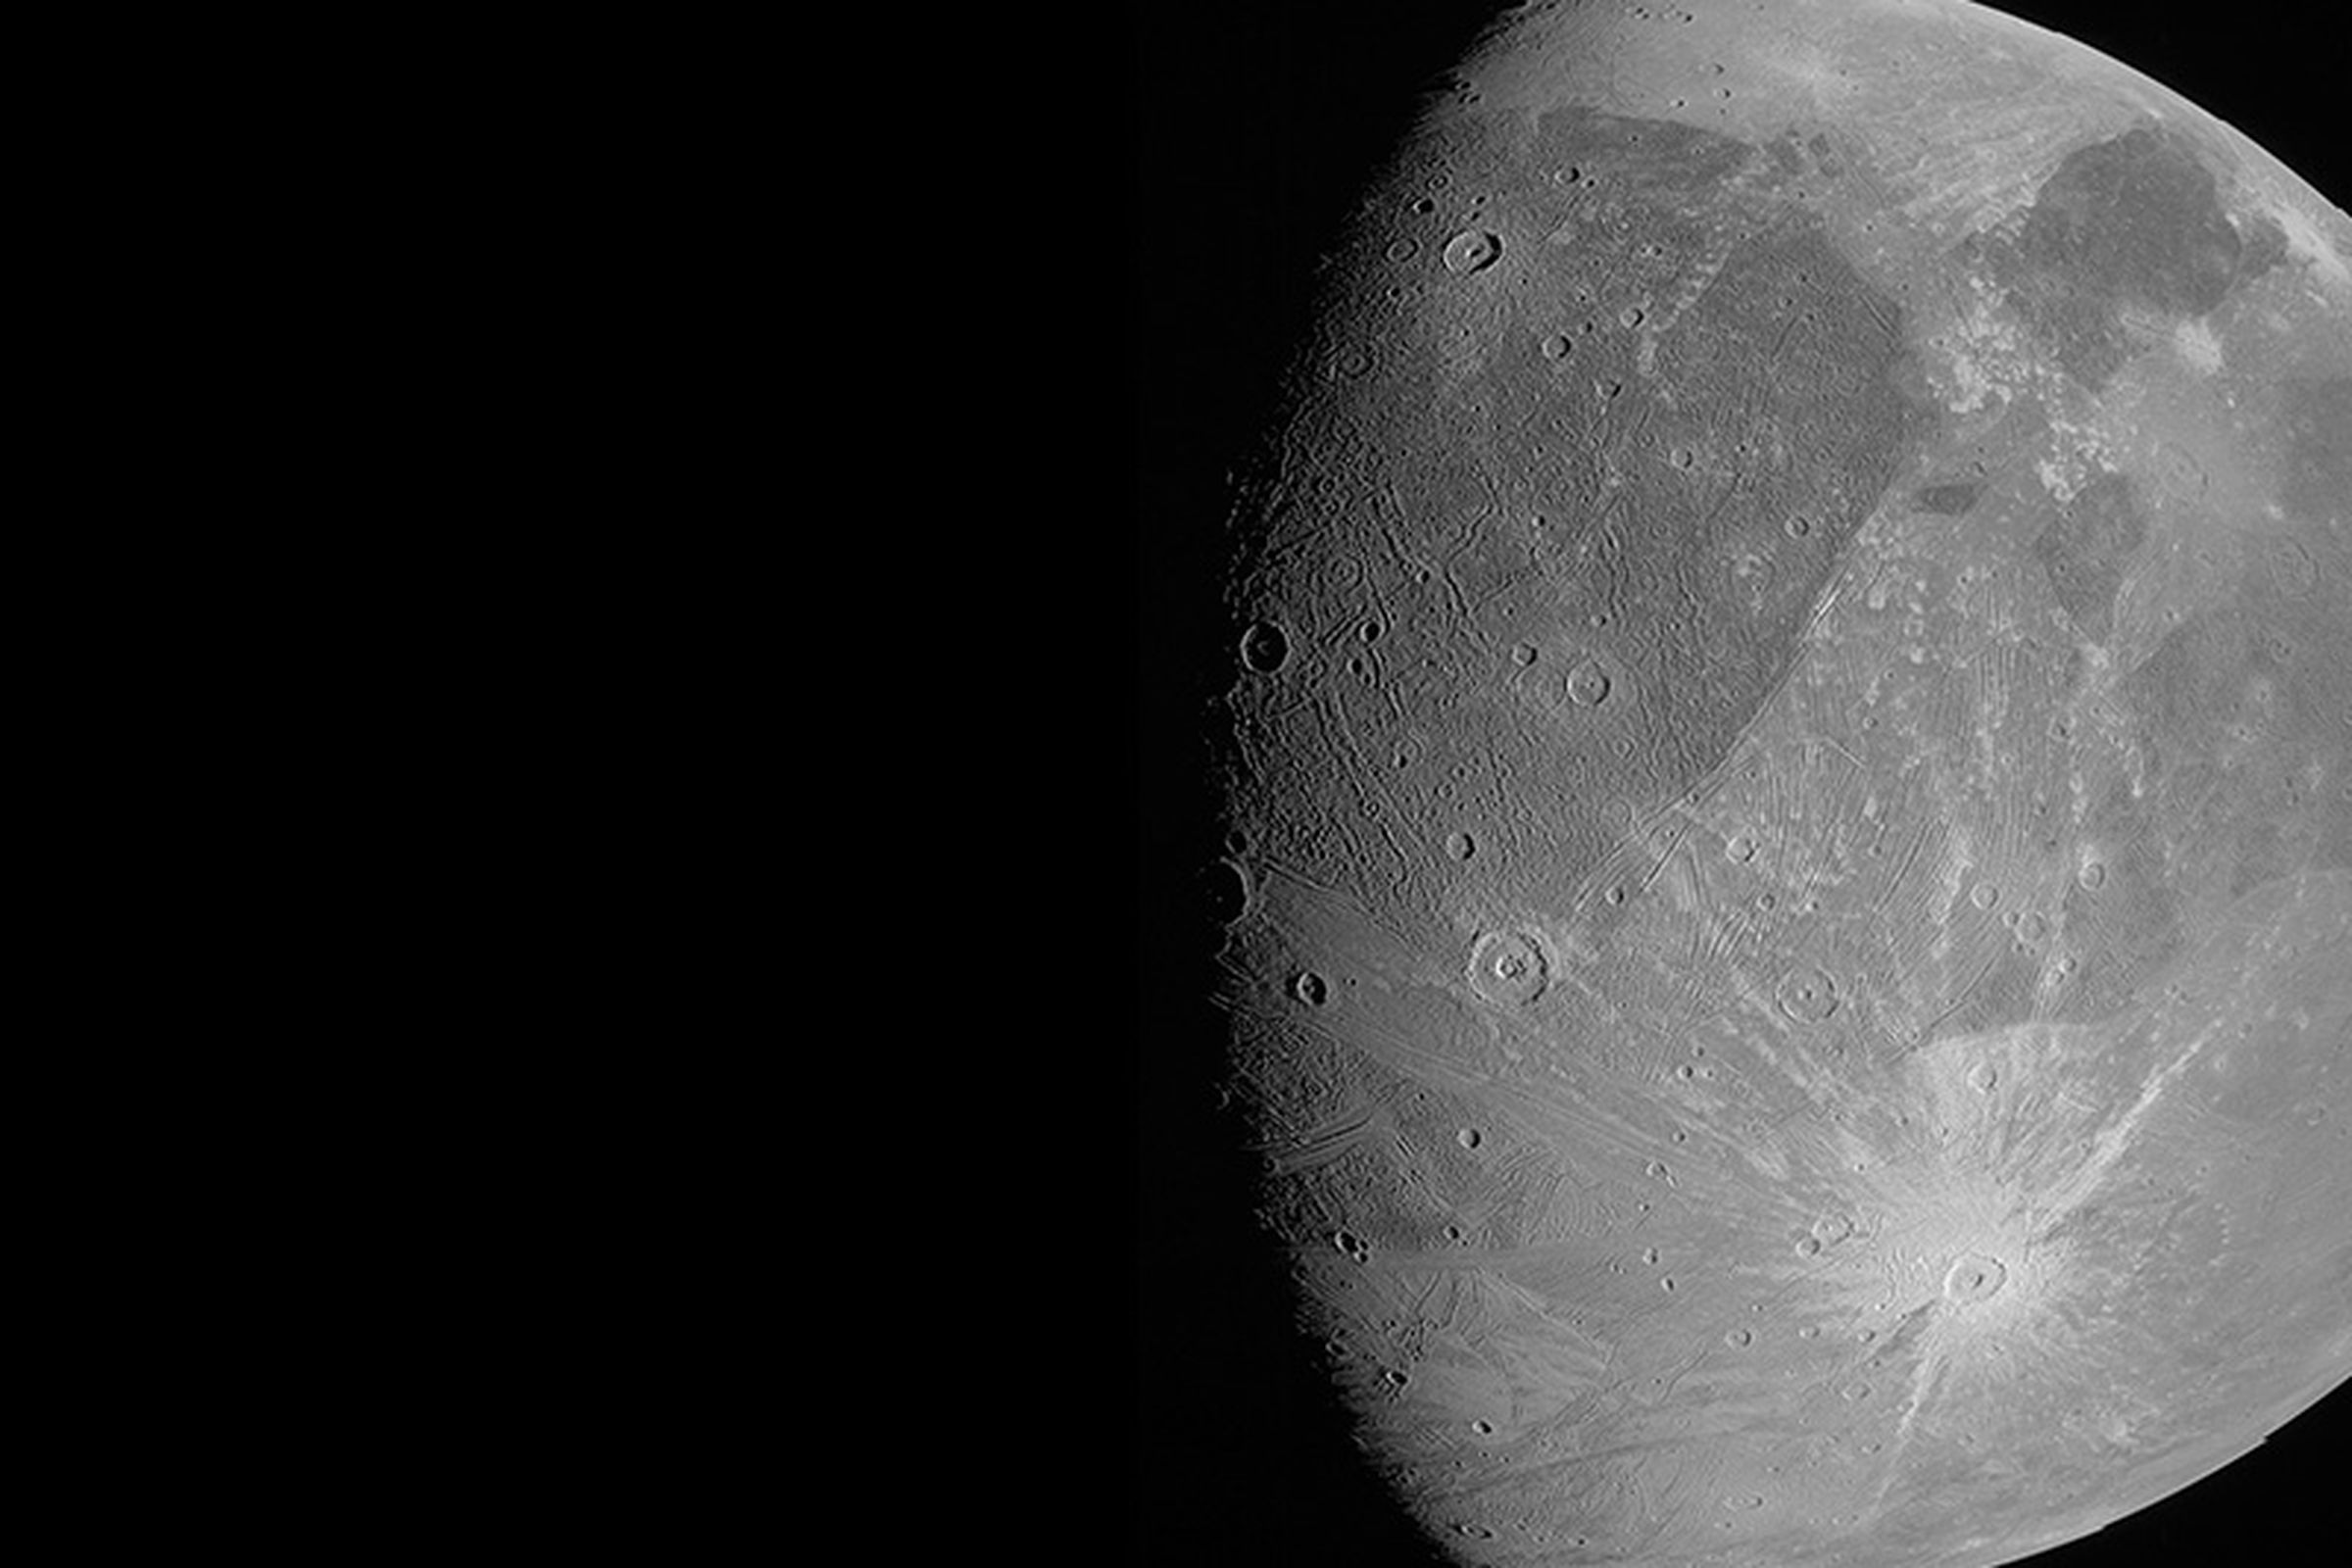 A preliminary close-up image of Ganymede obtained by the JunoCam imager